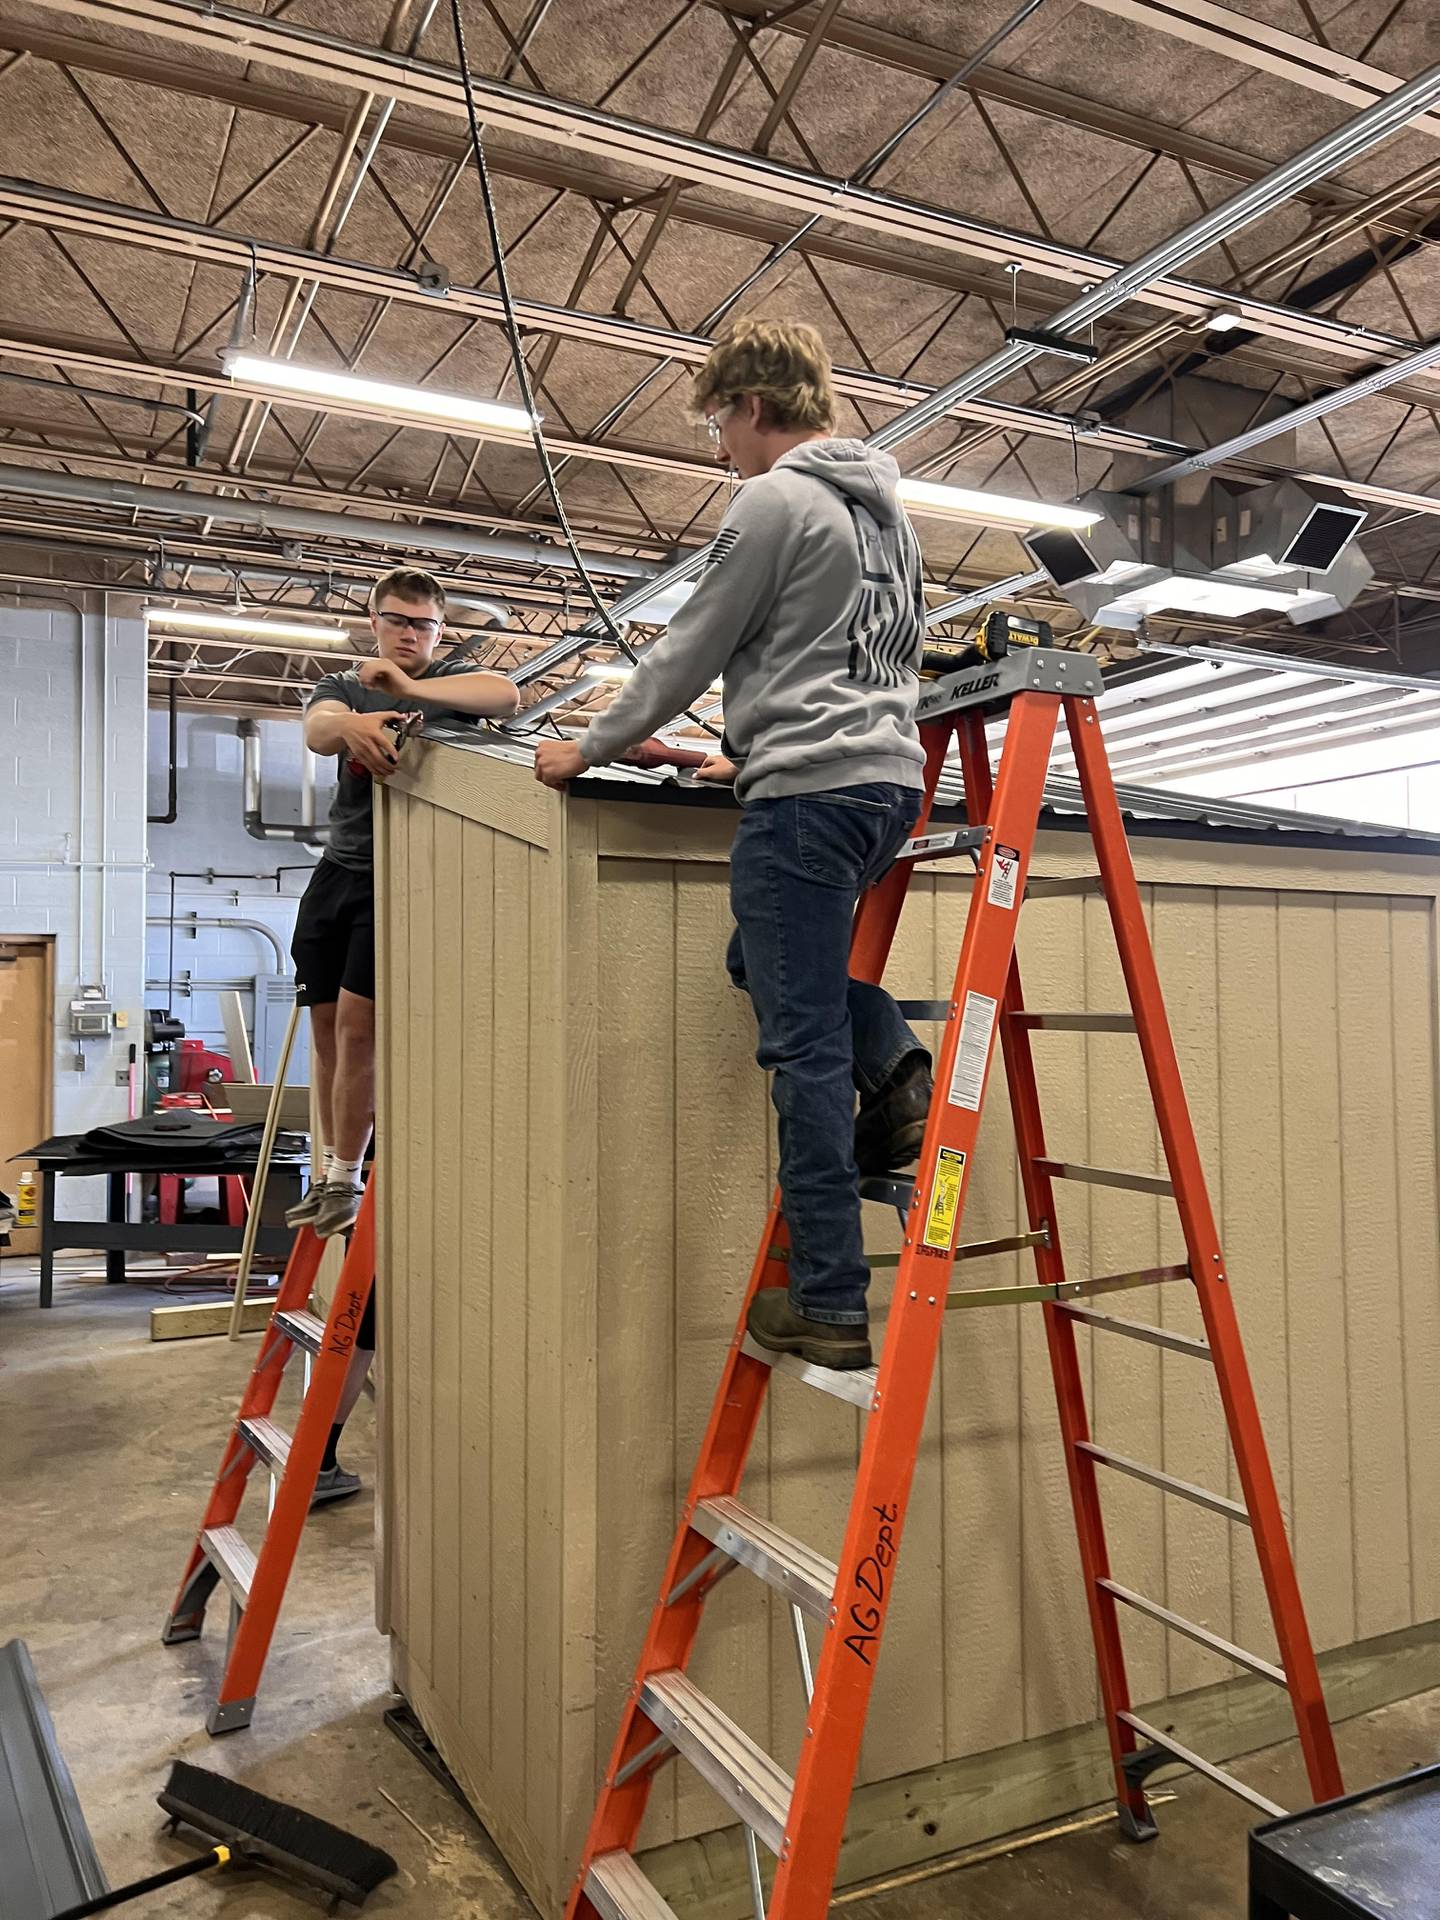 Students in the Oregon High School ag construction class had some hands-on learning about roofing, siding and framing as they assembled four wooden shelters that house mini free food centers. Seth McMillan’s 2023-2024 class had 19 students. The enrollment for 2024-2025 has more than doubled, with 45 students in the class, which will be split into two sections.